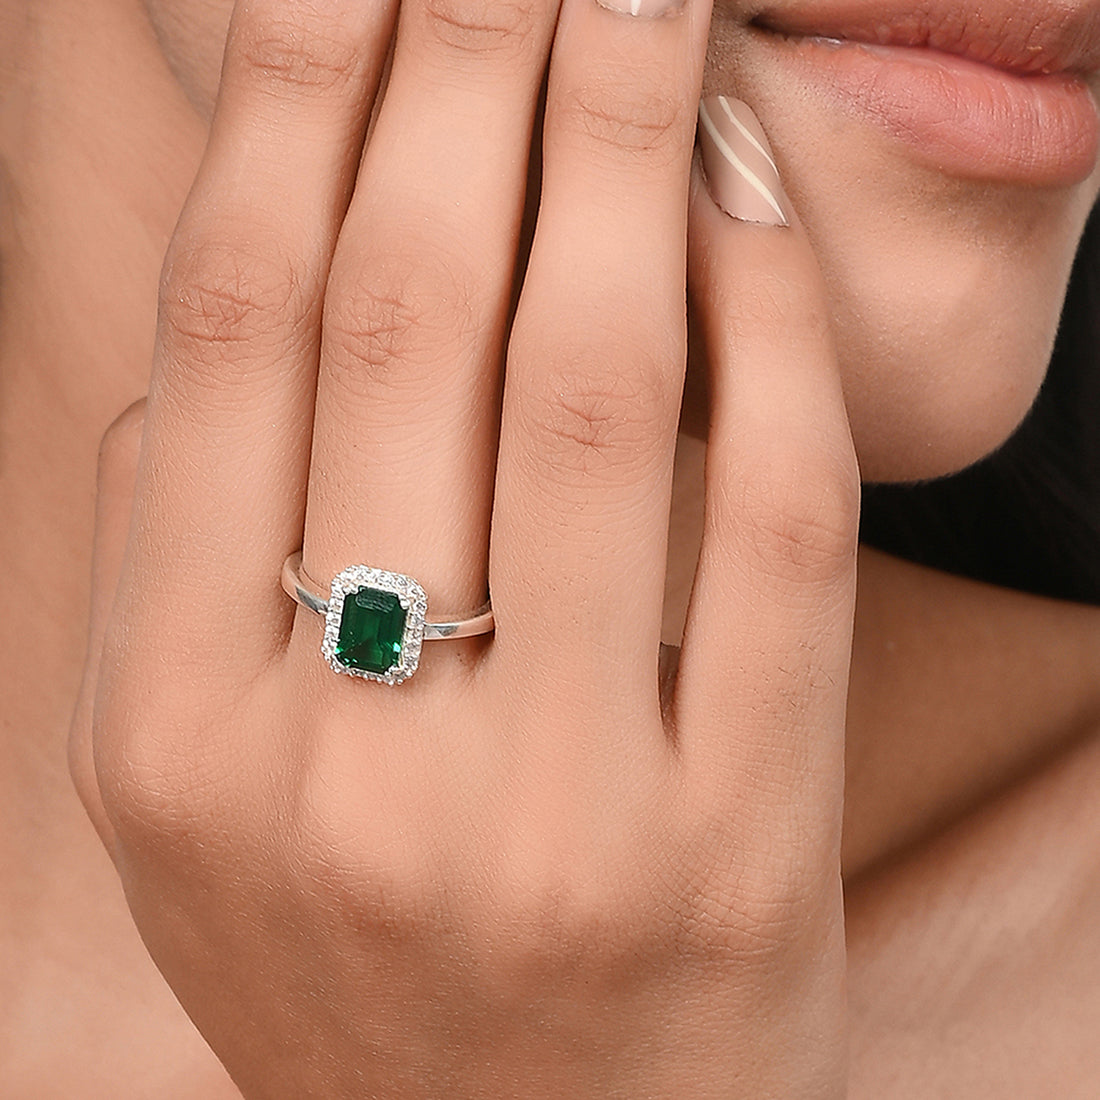 Buy EMERALD RINGS for Women, GREEN Gold Ring, Oval Dark Green Crystal Stone,  May Birthstone Jewelry Gifts for Her May Birthstone Gem R4016B Online in  India - Etsy